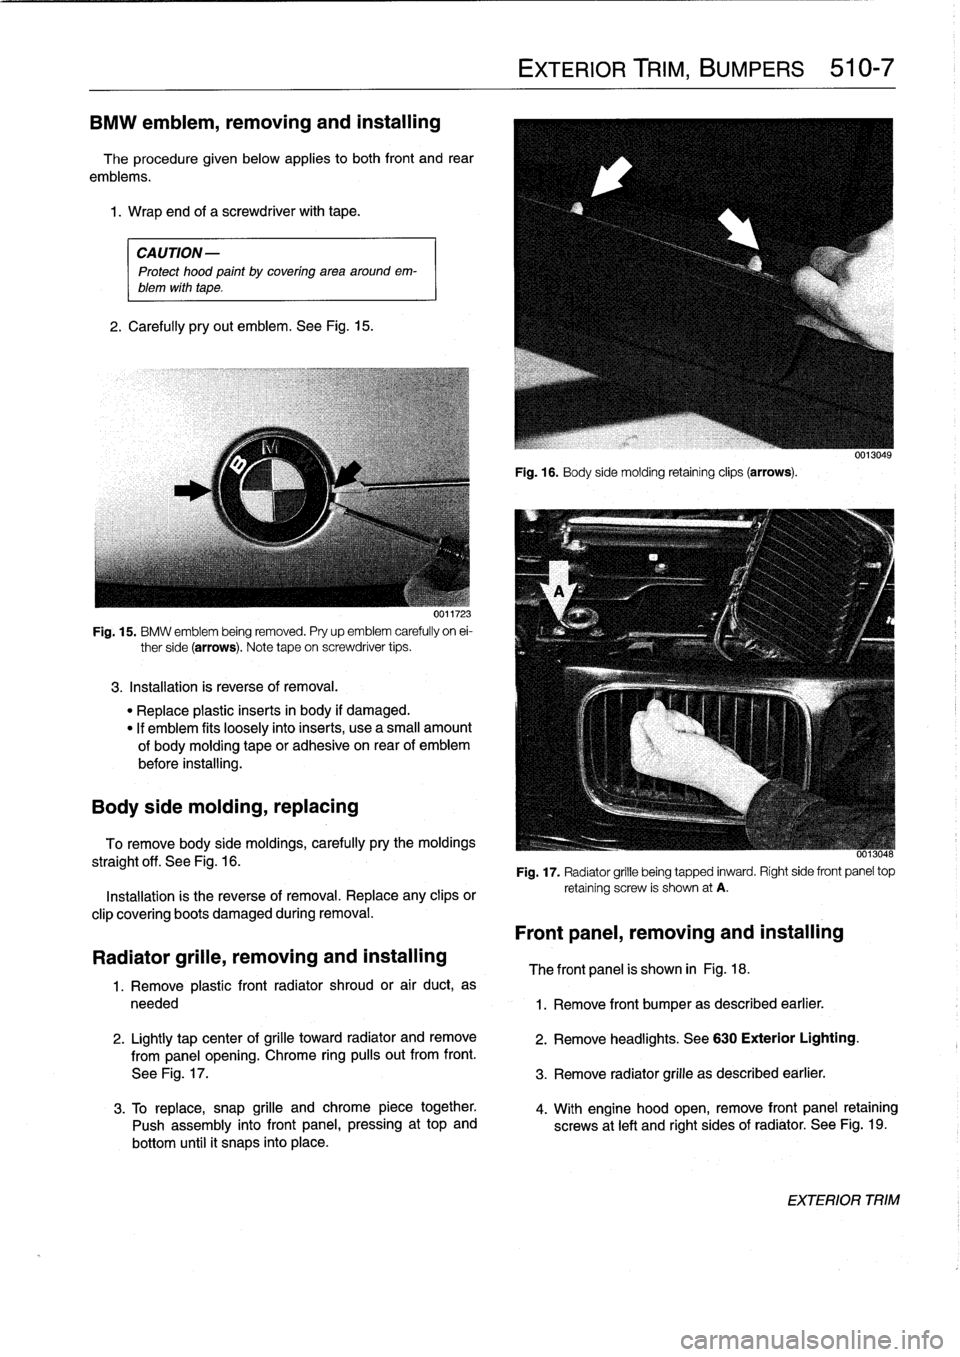 BMW M3 1995 E36 Workshop Manual 
BMW
emblem,
removing
and
installing

The
procedure
given
below
applies
to
both
front
and
rear

emblems
.

1
.
Wrap
and
of
a
screwdriver
with
tape
.

CAUTION-

Protect
hood
paint
by
coveringarea
aroun